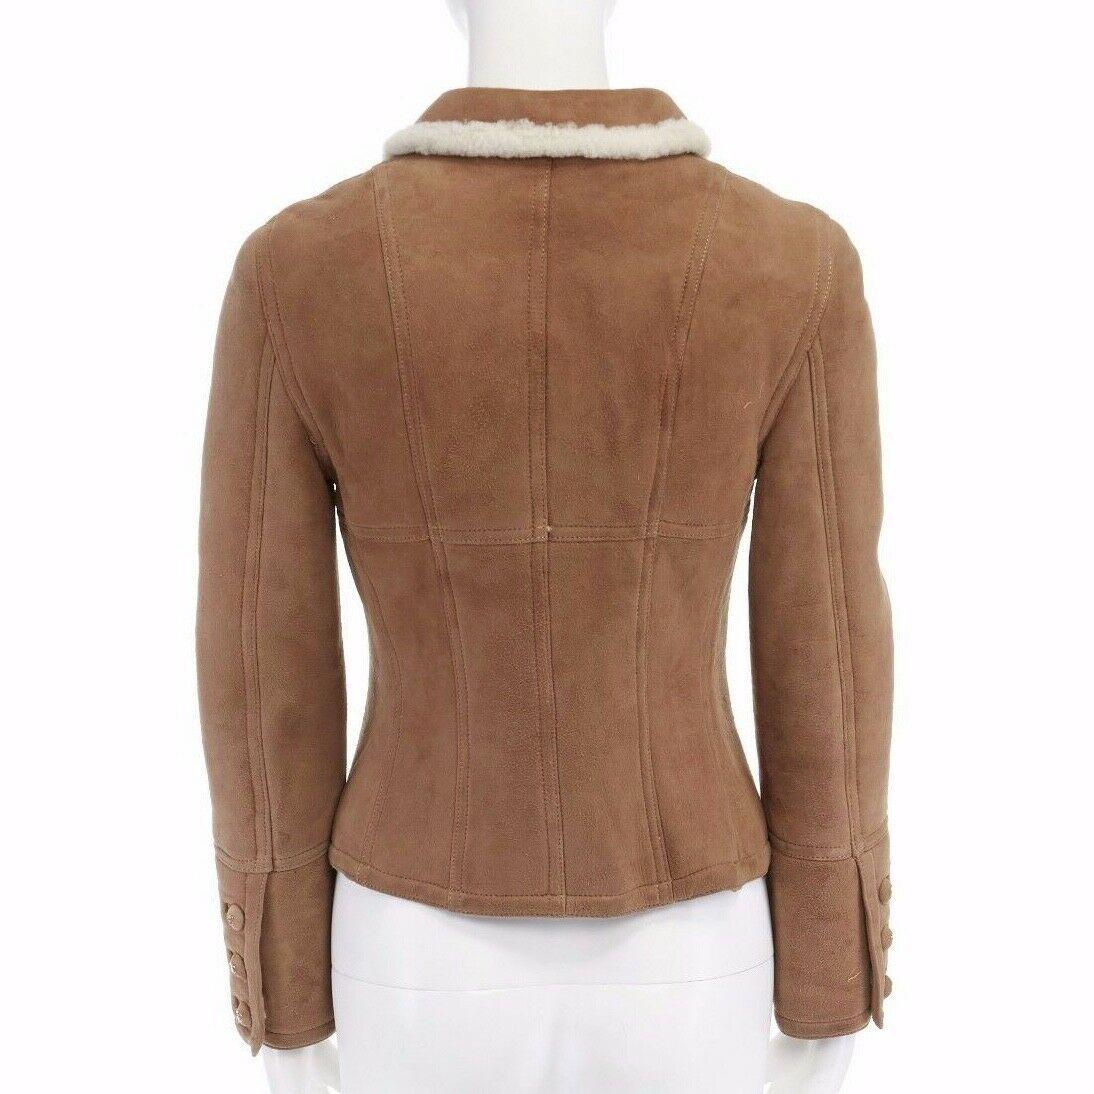 Women's CHANEL Vintage 96A brown suede shearling lined cropped aviator jacket FR38 US4 S